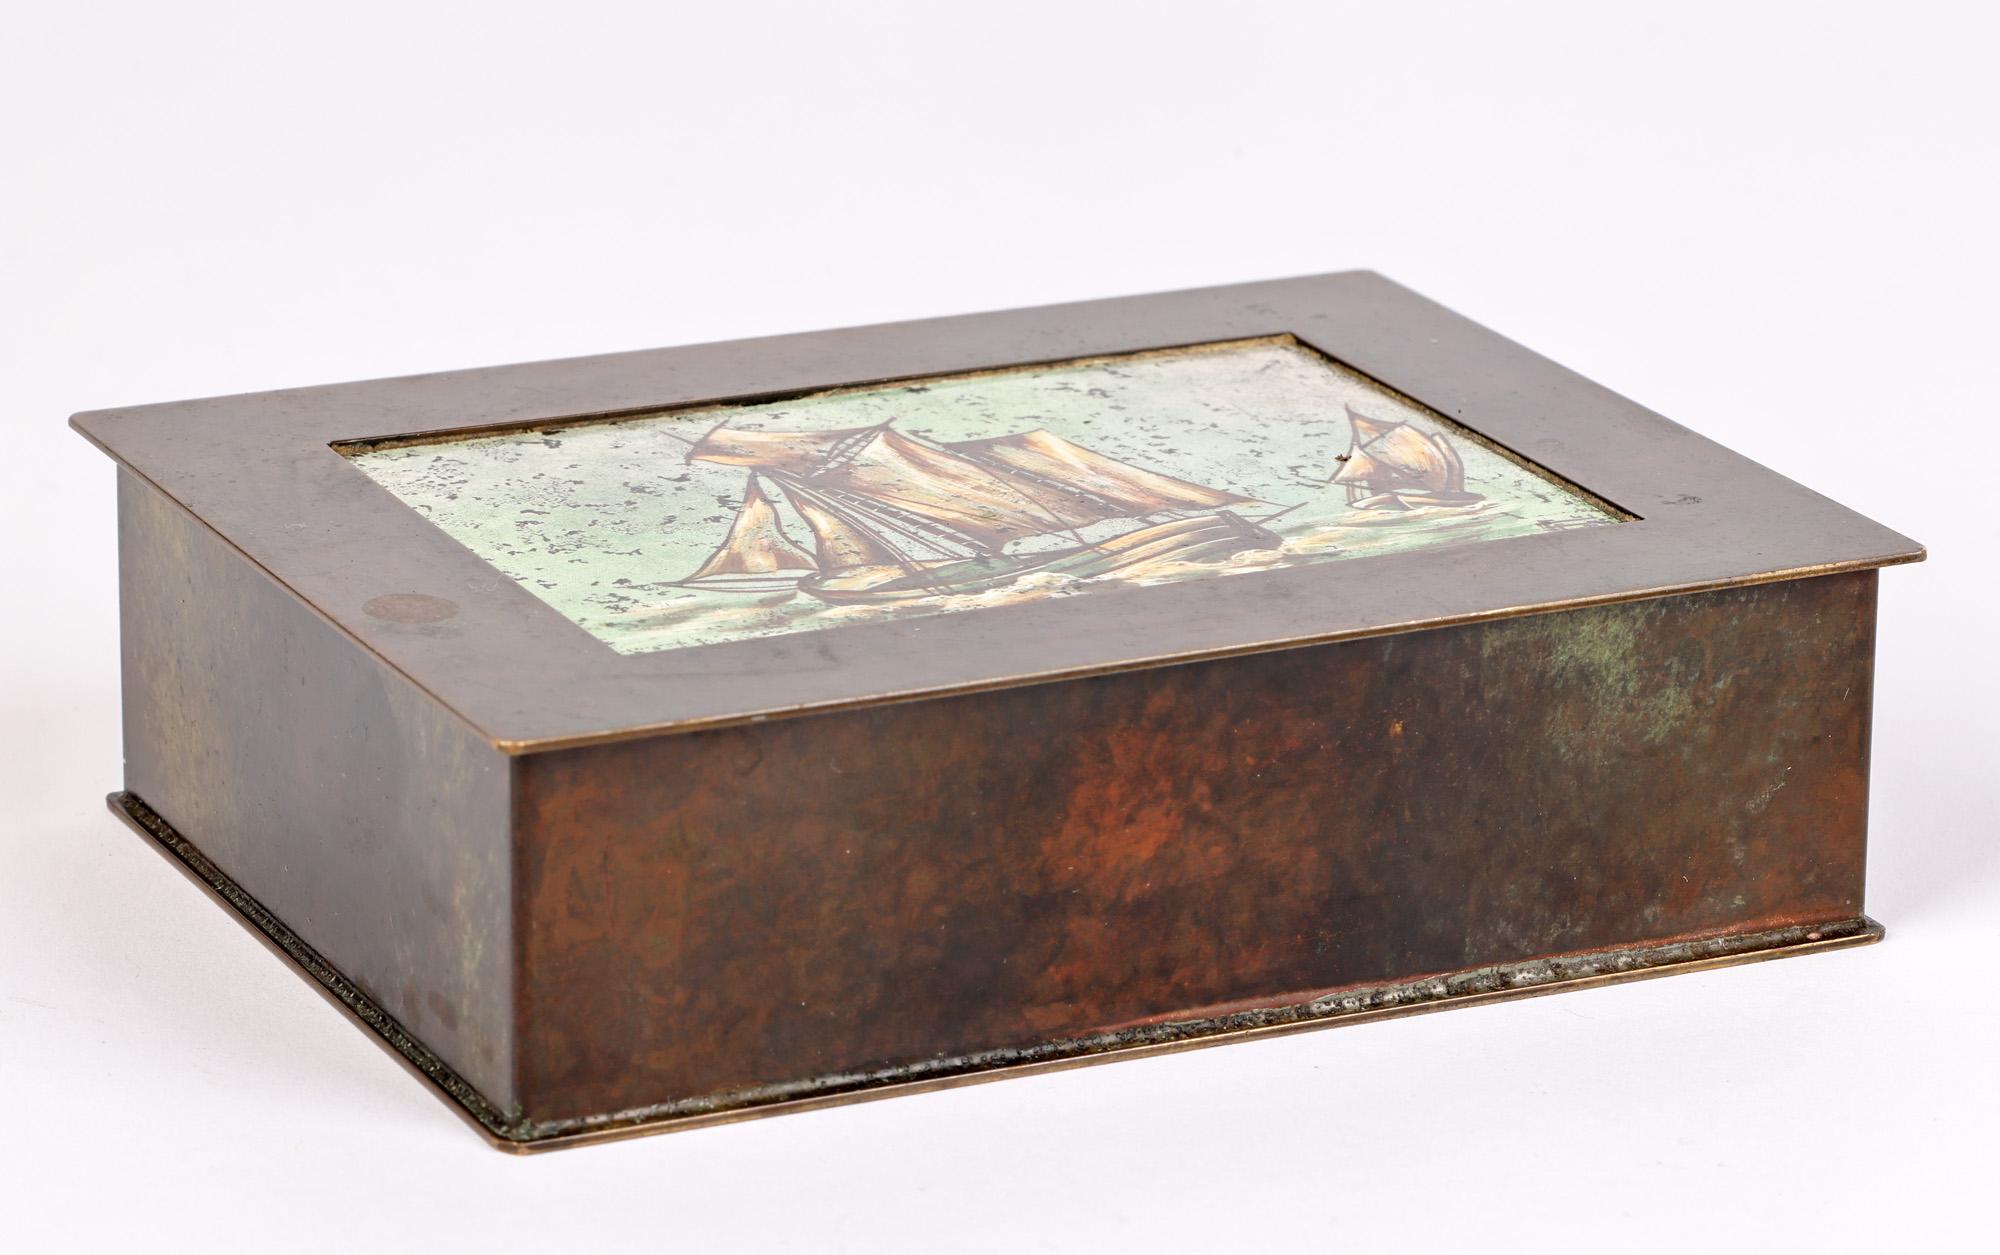 An unusual and stylish Danish Bronze box mounted with an enamel plaque with sailing boats marked Smedien and dating from around 1930. The rectangular shaped quality box is heavily made, the lower compartment lined with wood. With overlapping base